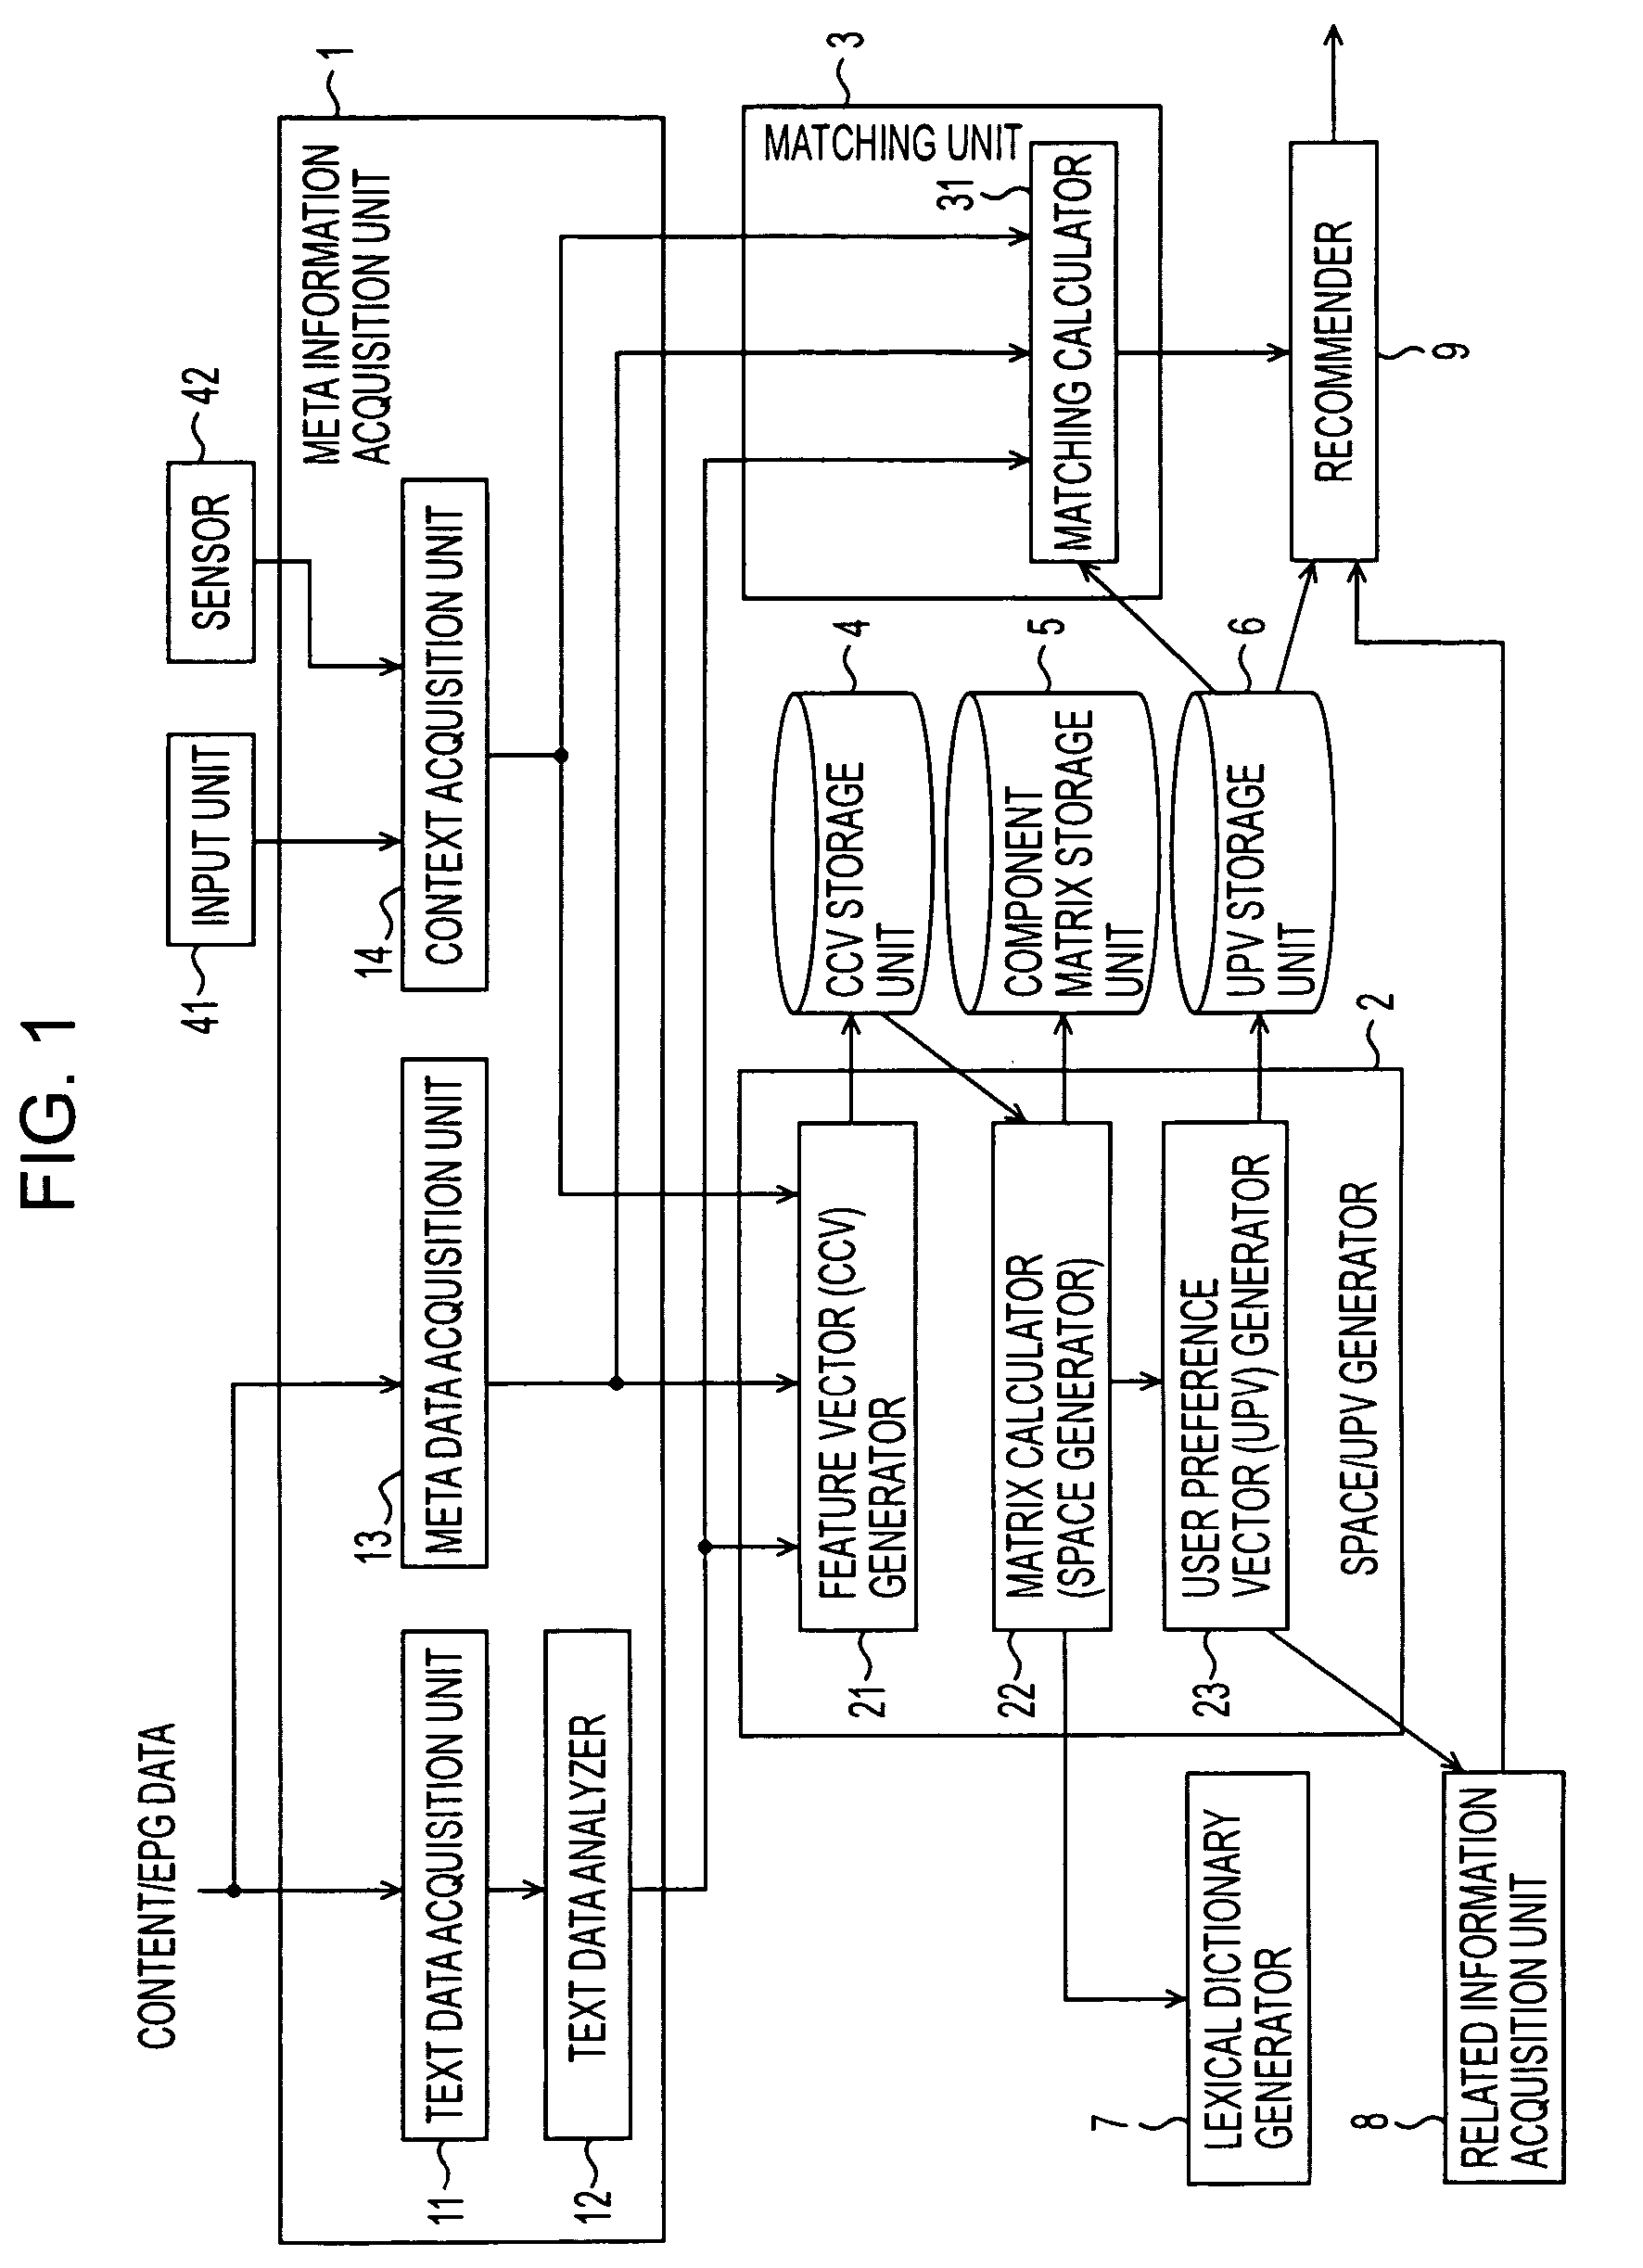 Information processing apparatus, information processing method, program for implementing information processing method, information processing system, and method for information processing system